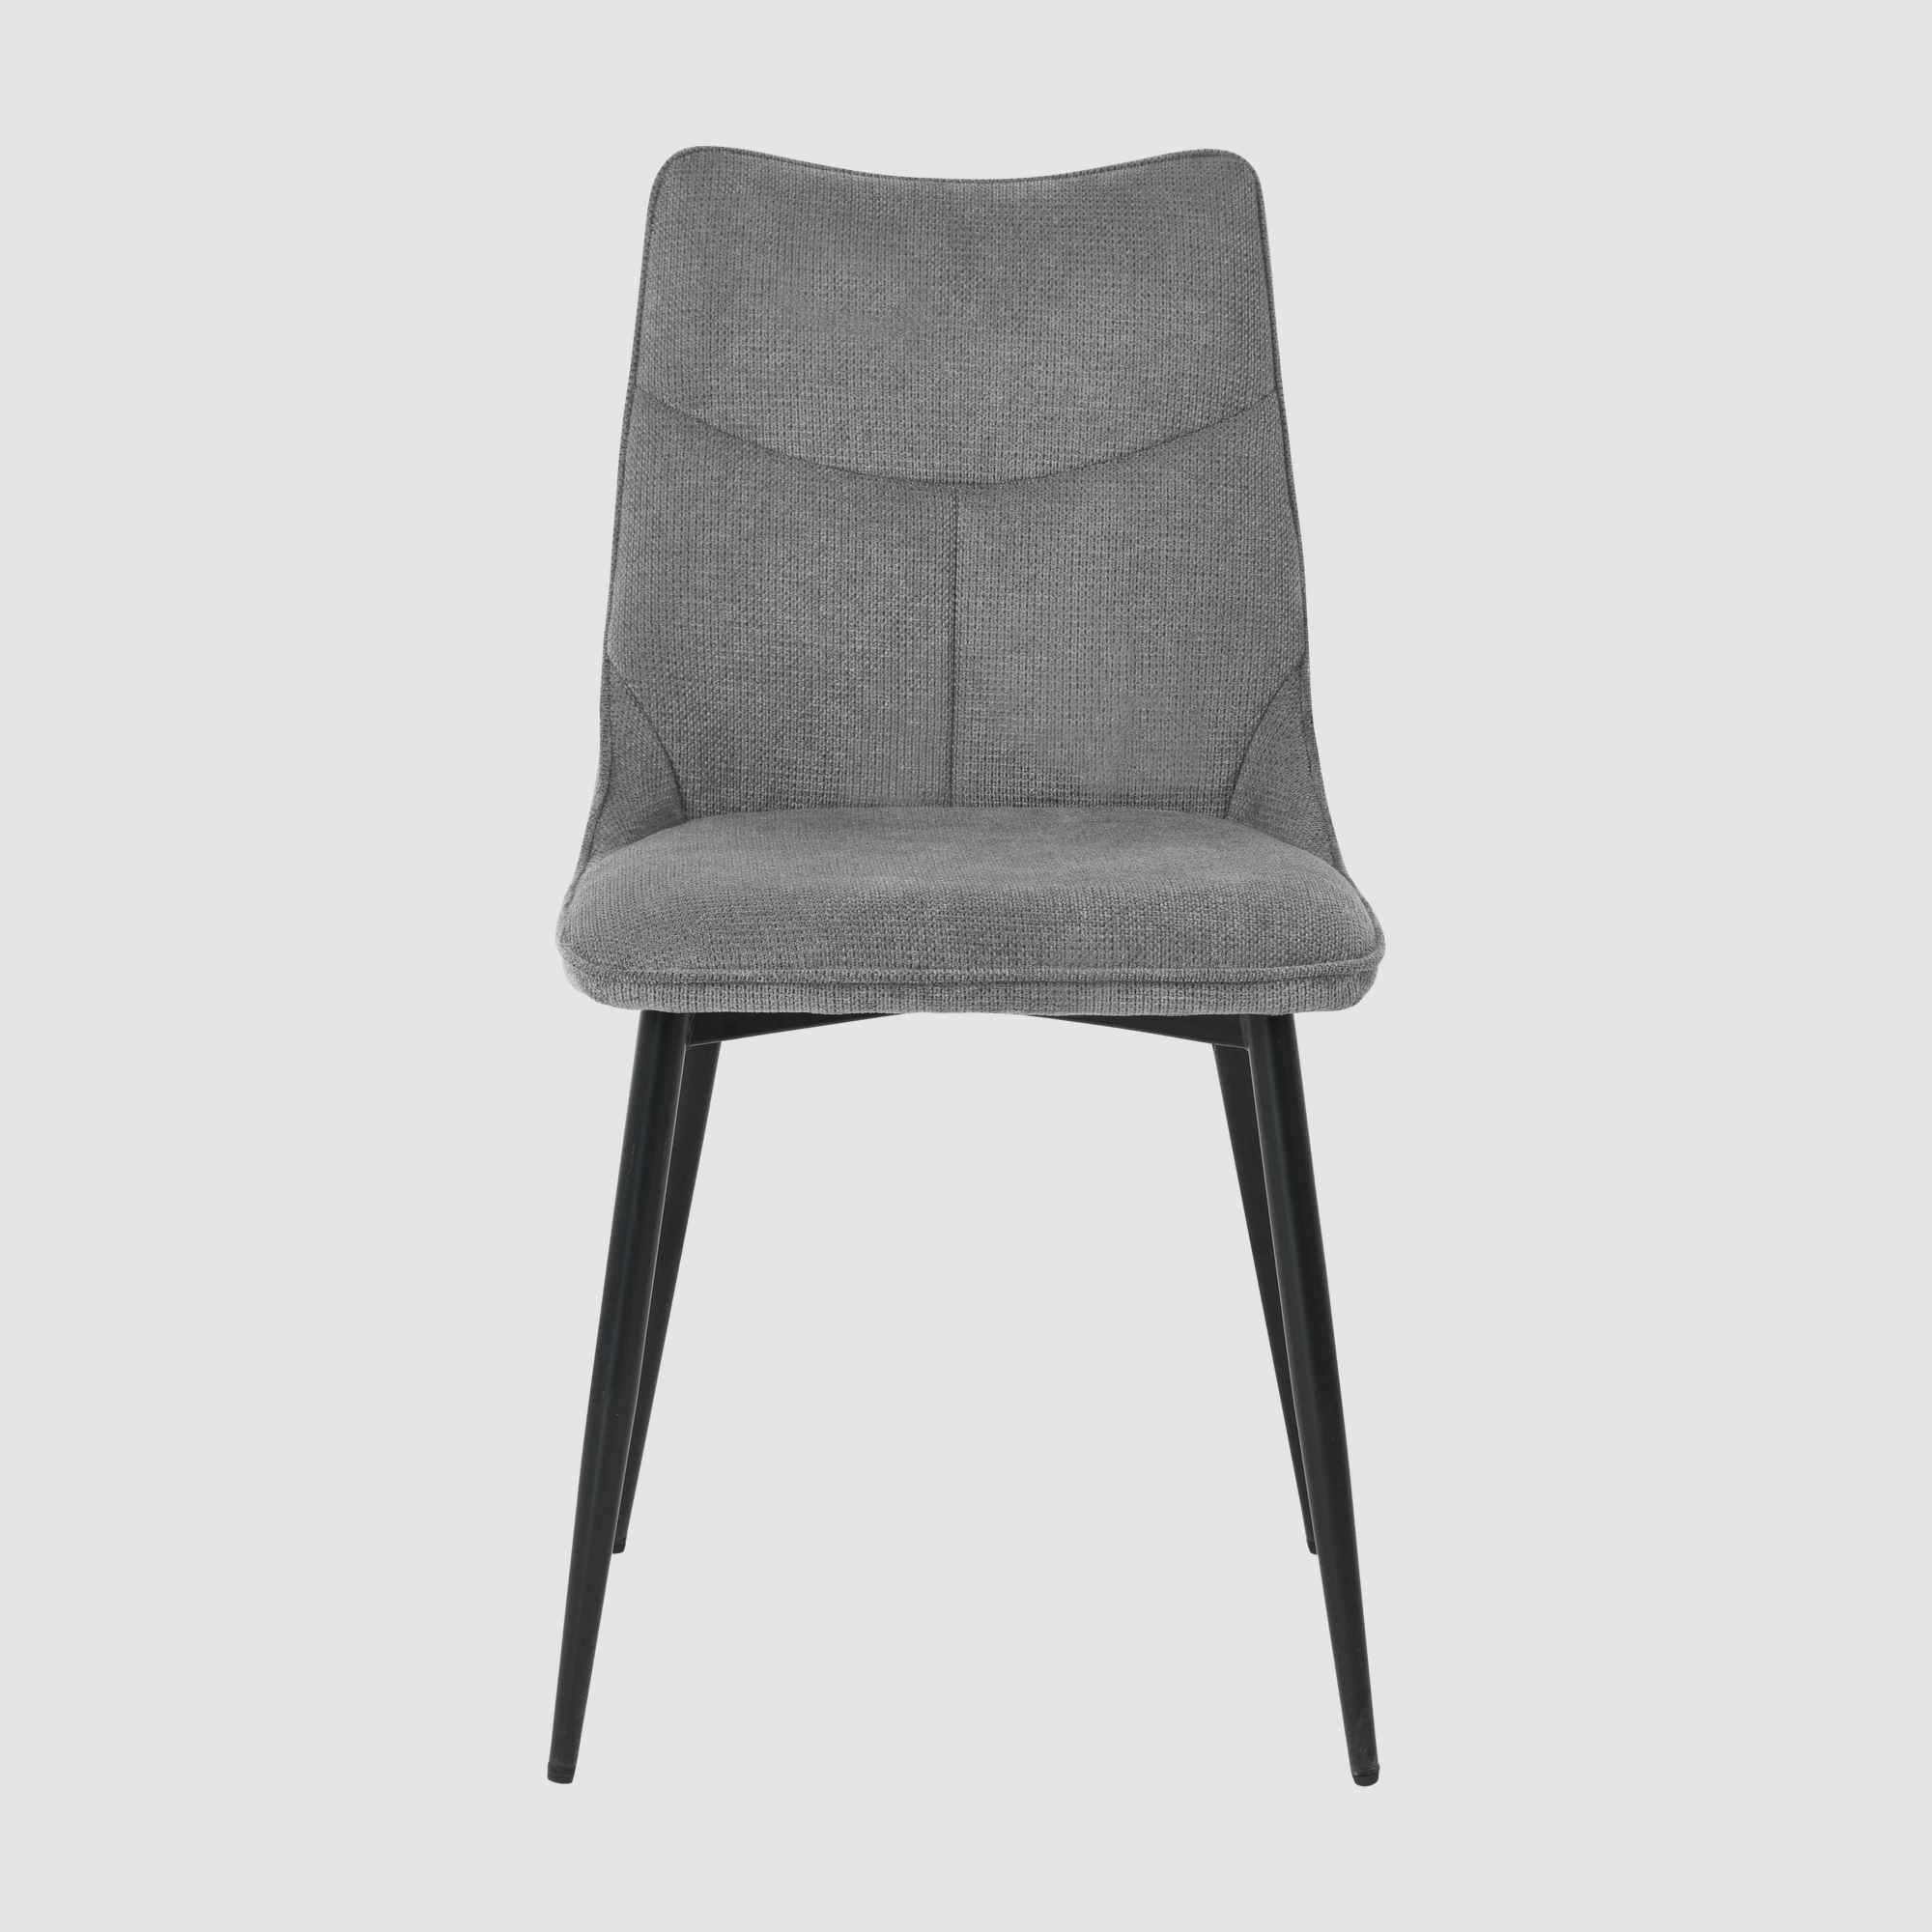 Hillcrest Tolsona Dining Chair Grey